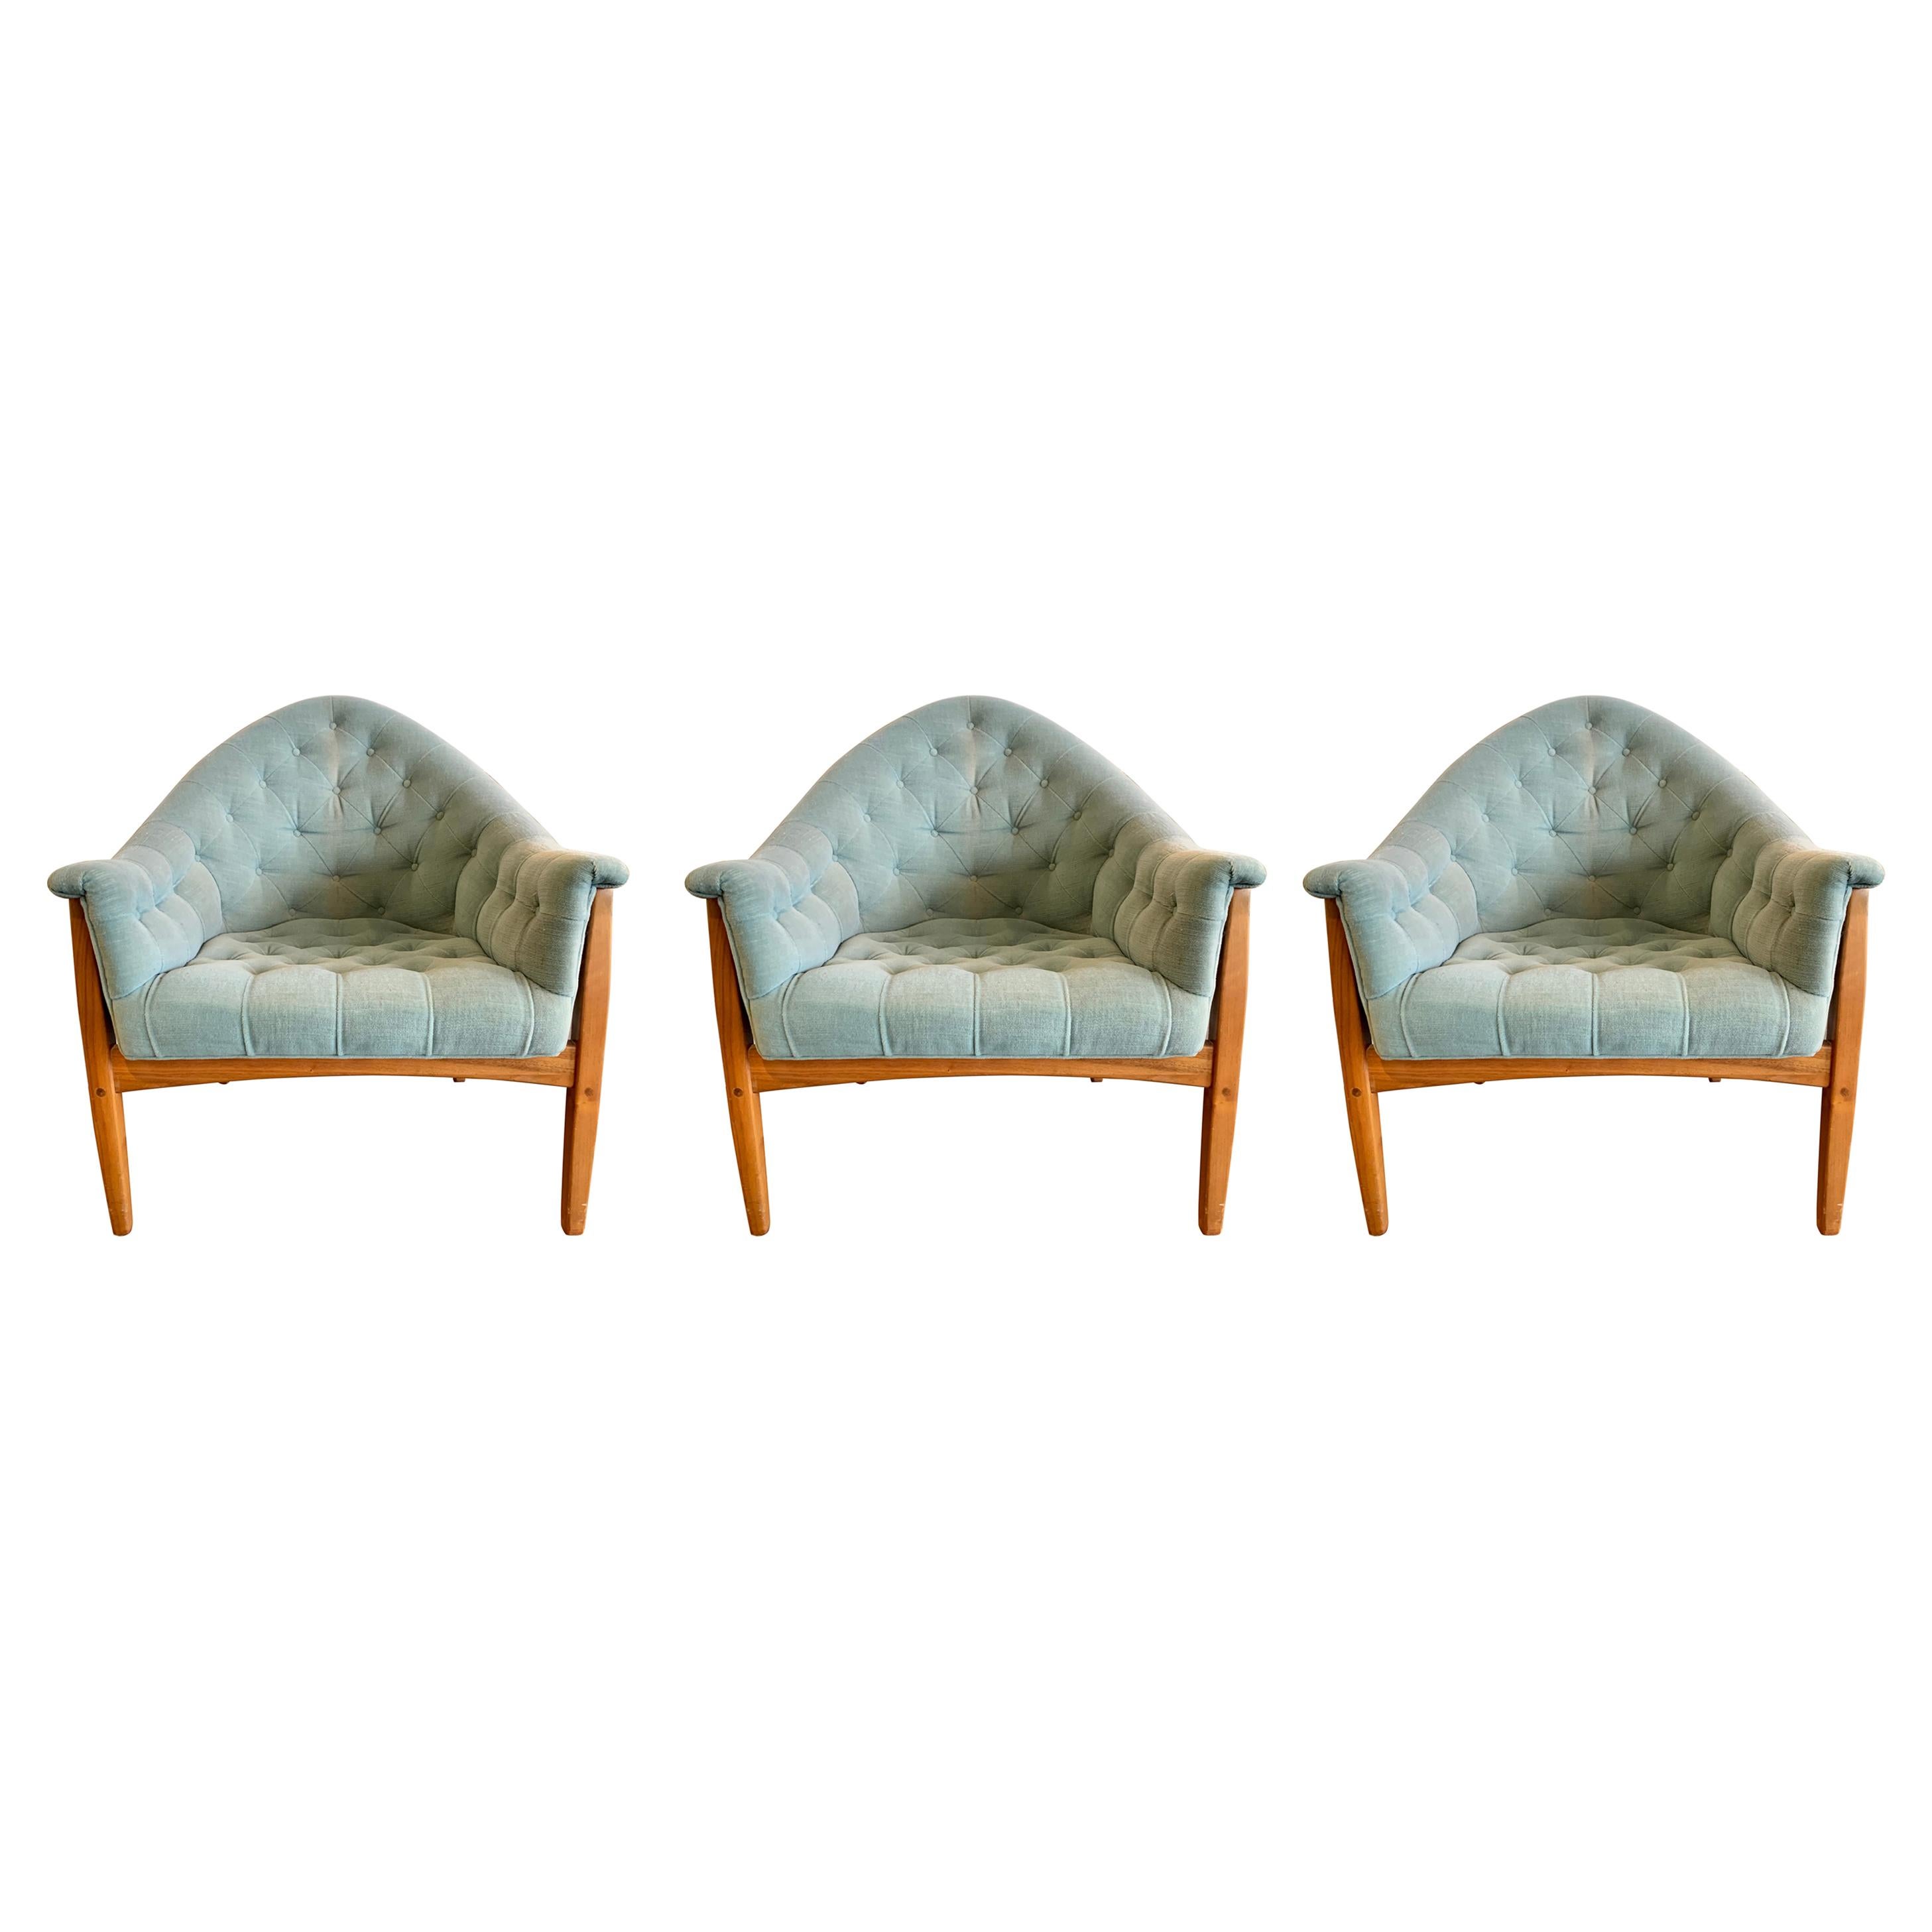 Three Thayer Coggin by Milo Baughman Archie Exposed Frame Lounge Chairs, 1965